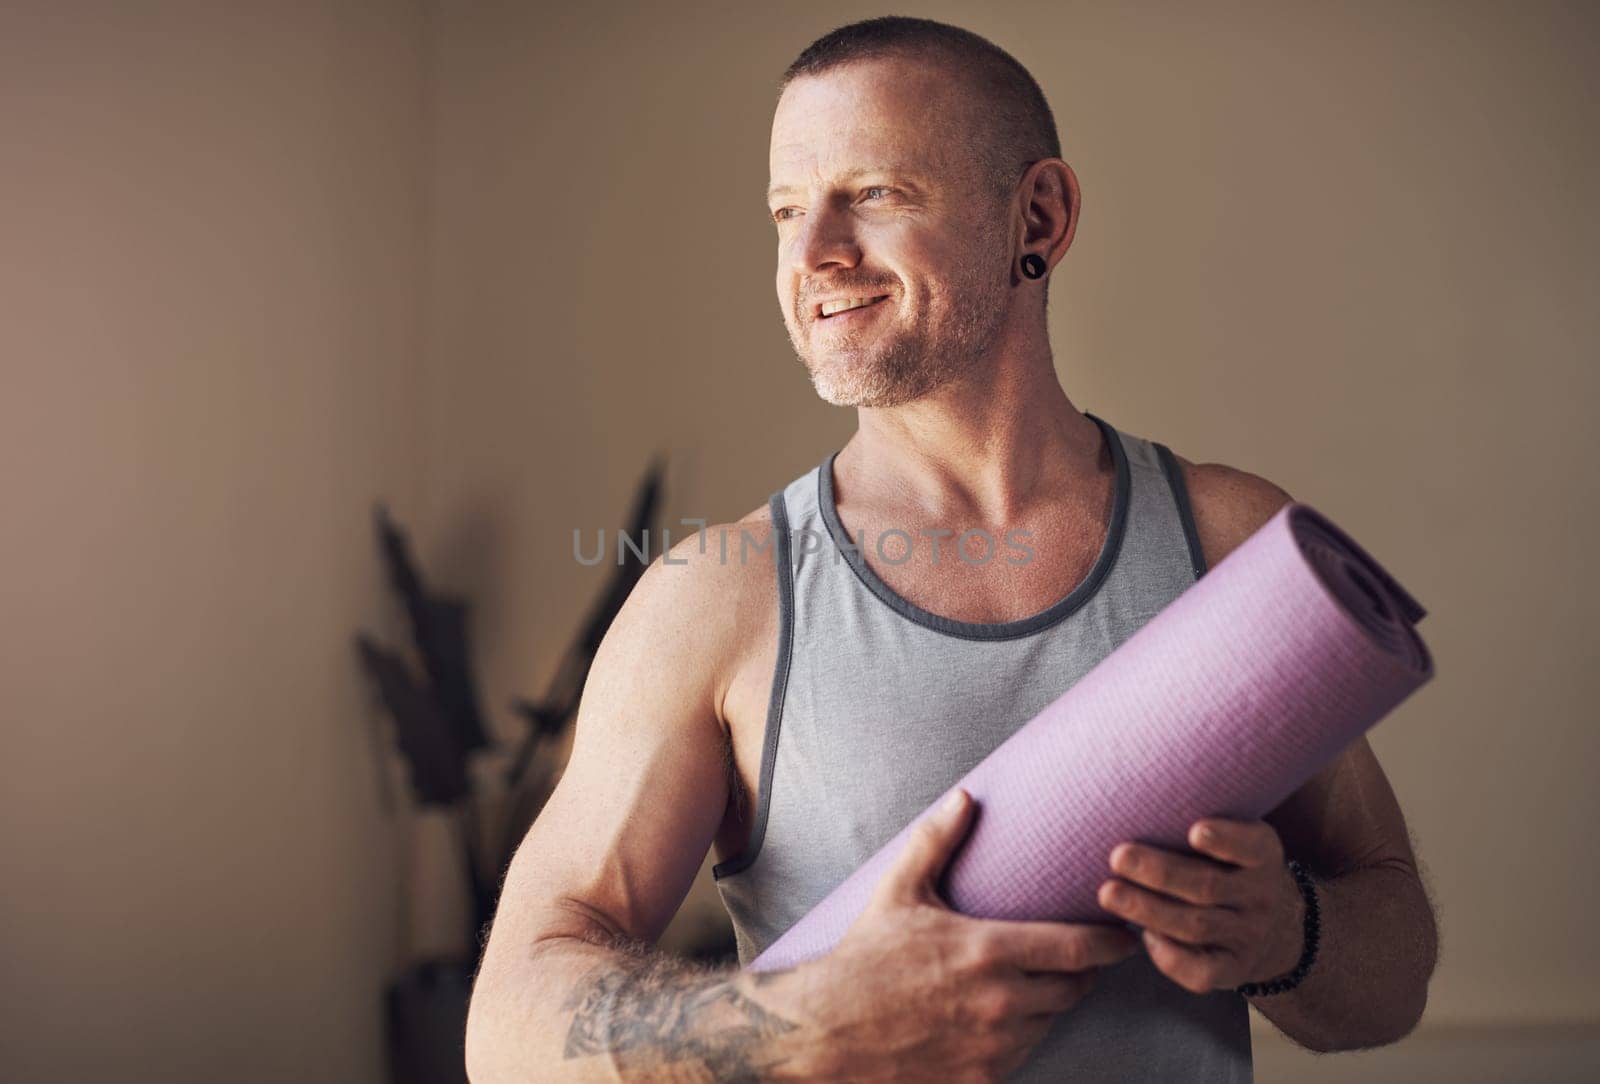 Yoga helps me slow down and appreciate life. Cropped shot of a handsome young man standing alone and holding his yoga mat before an indoor yoga session. by YuriArcurs